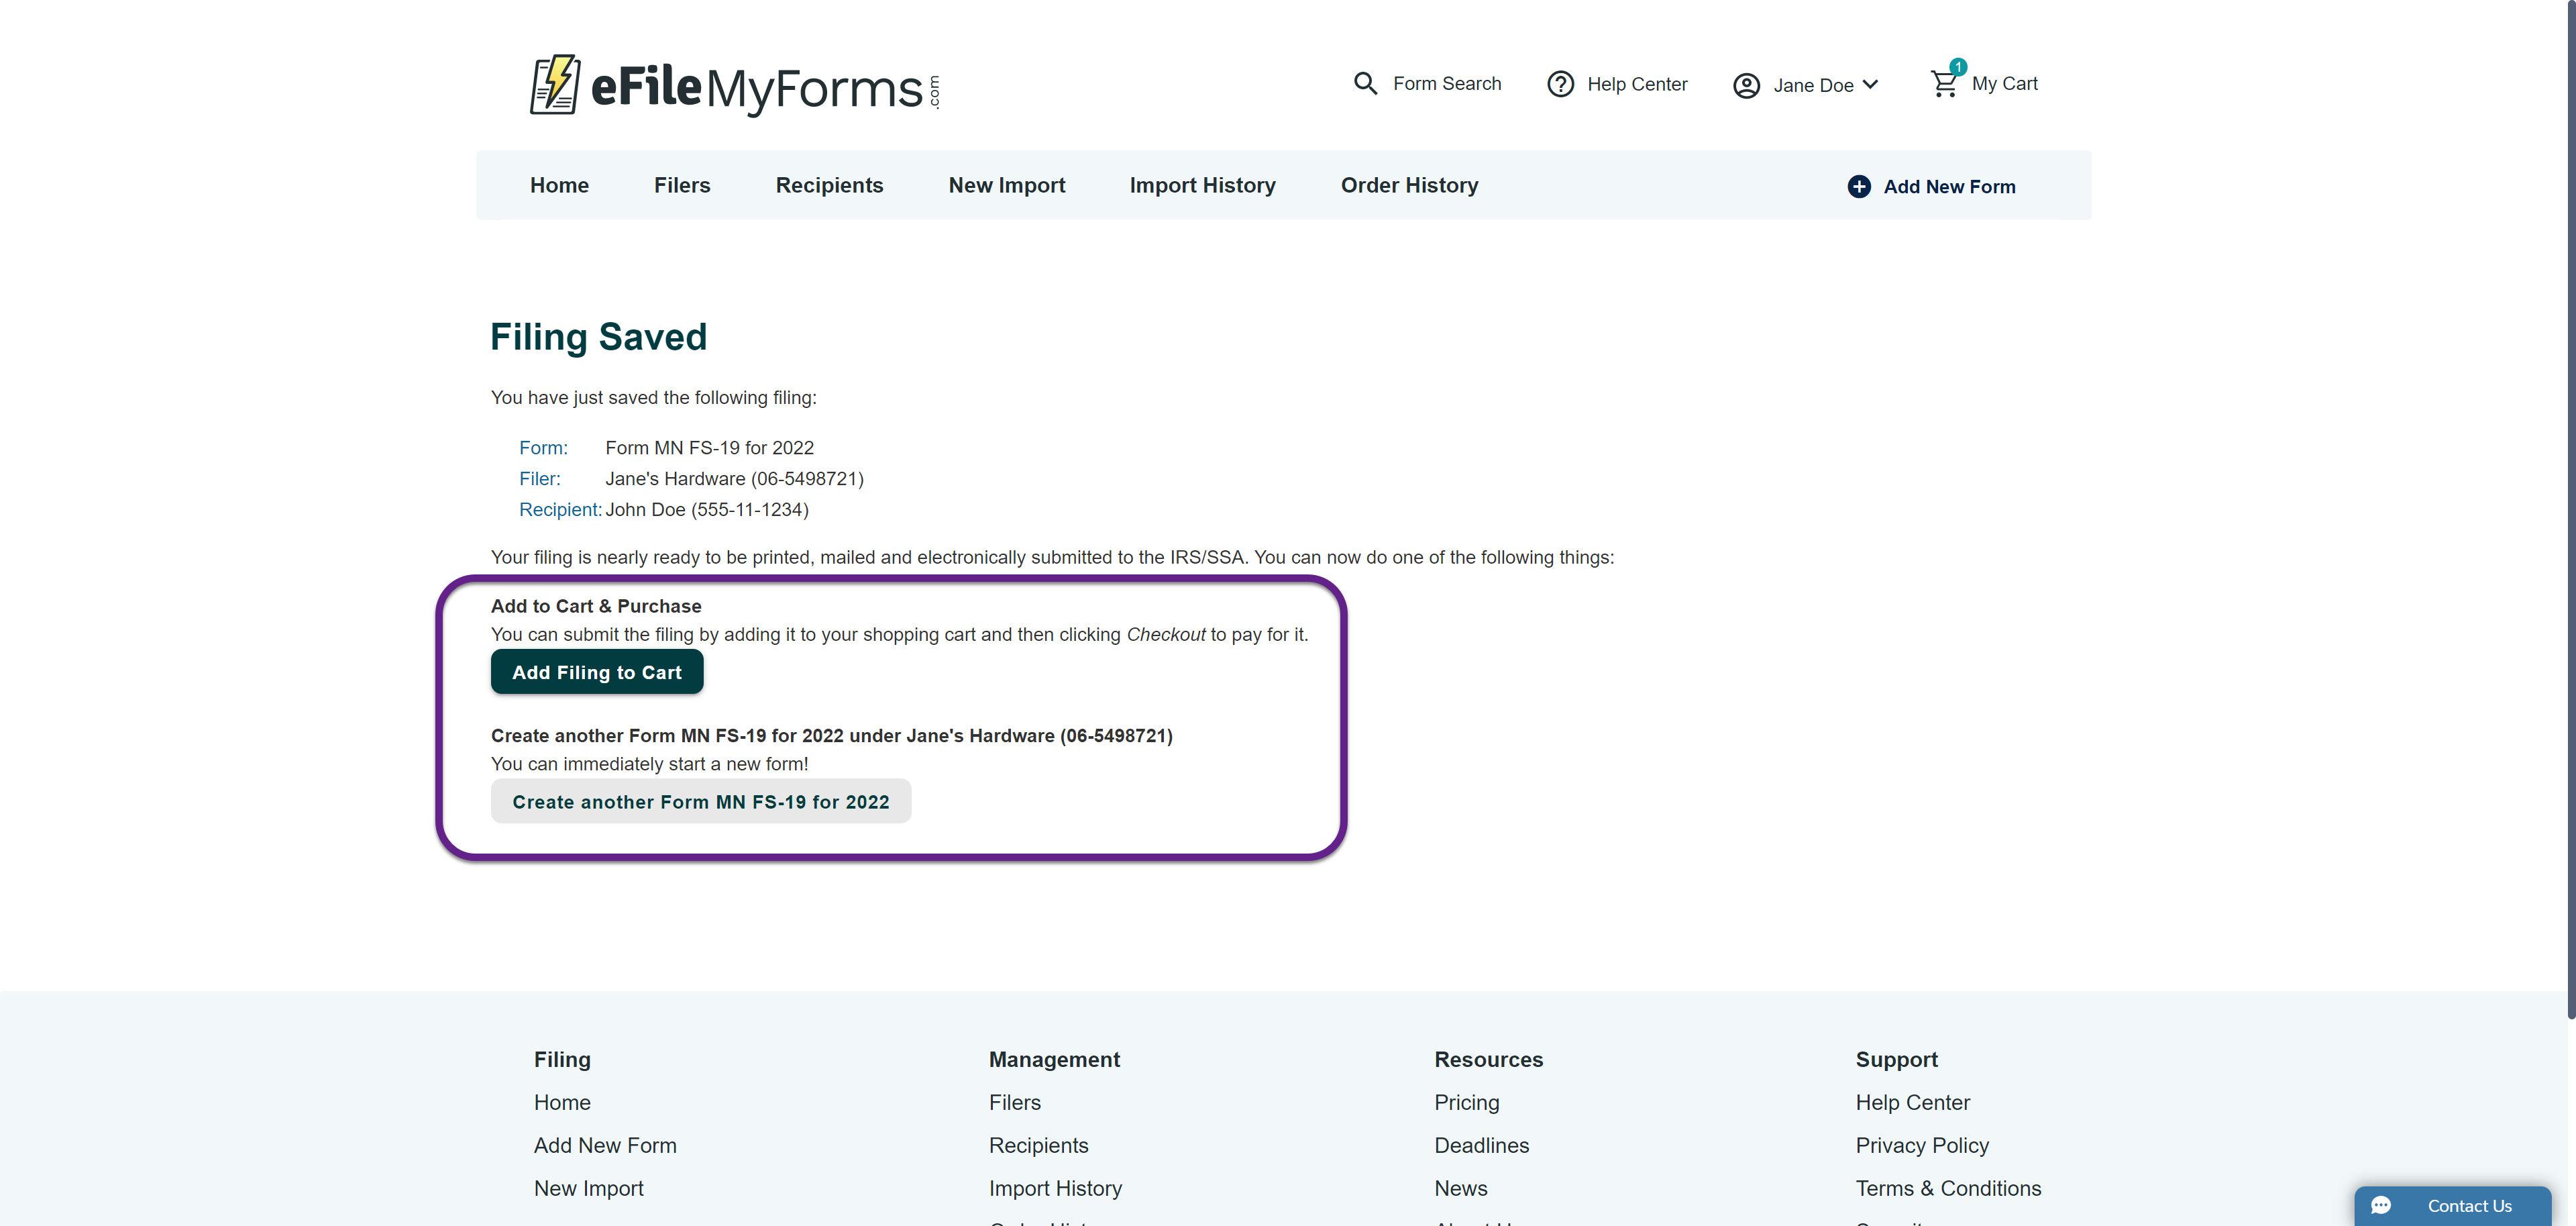 Image of the Filing Saved page with a callout on the Add Filing to Cart button and Create another Form button.